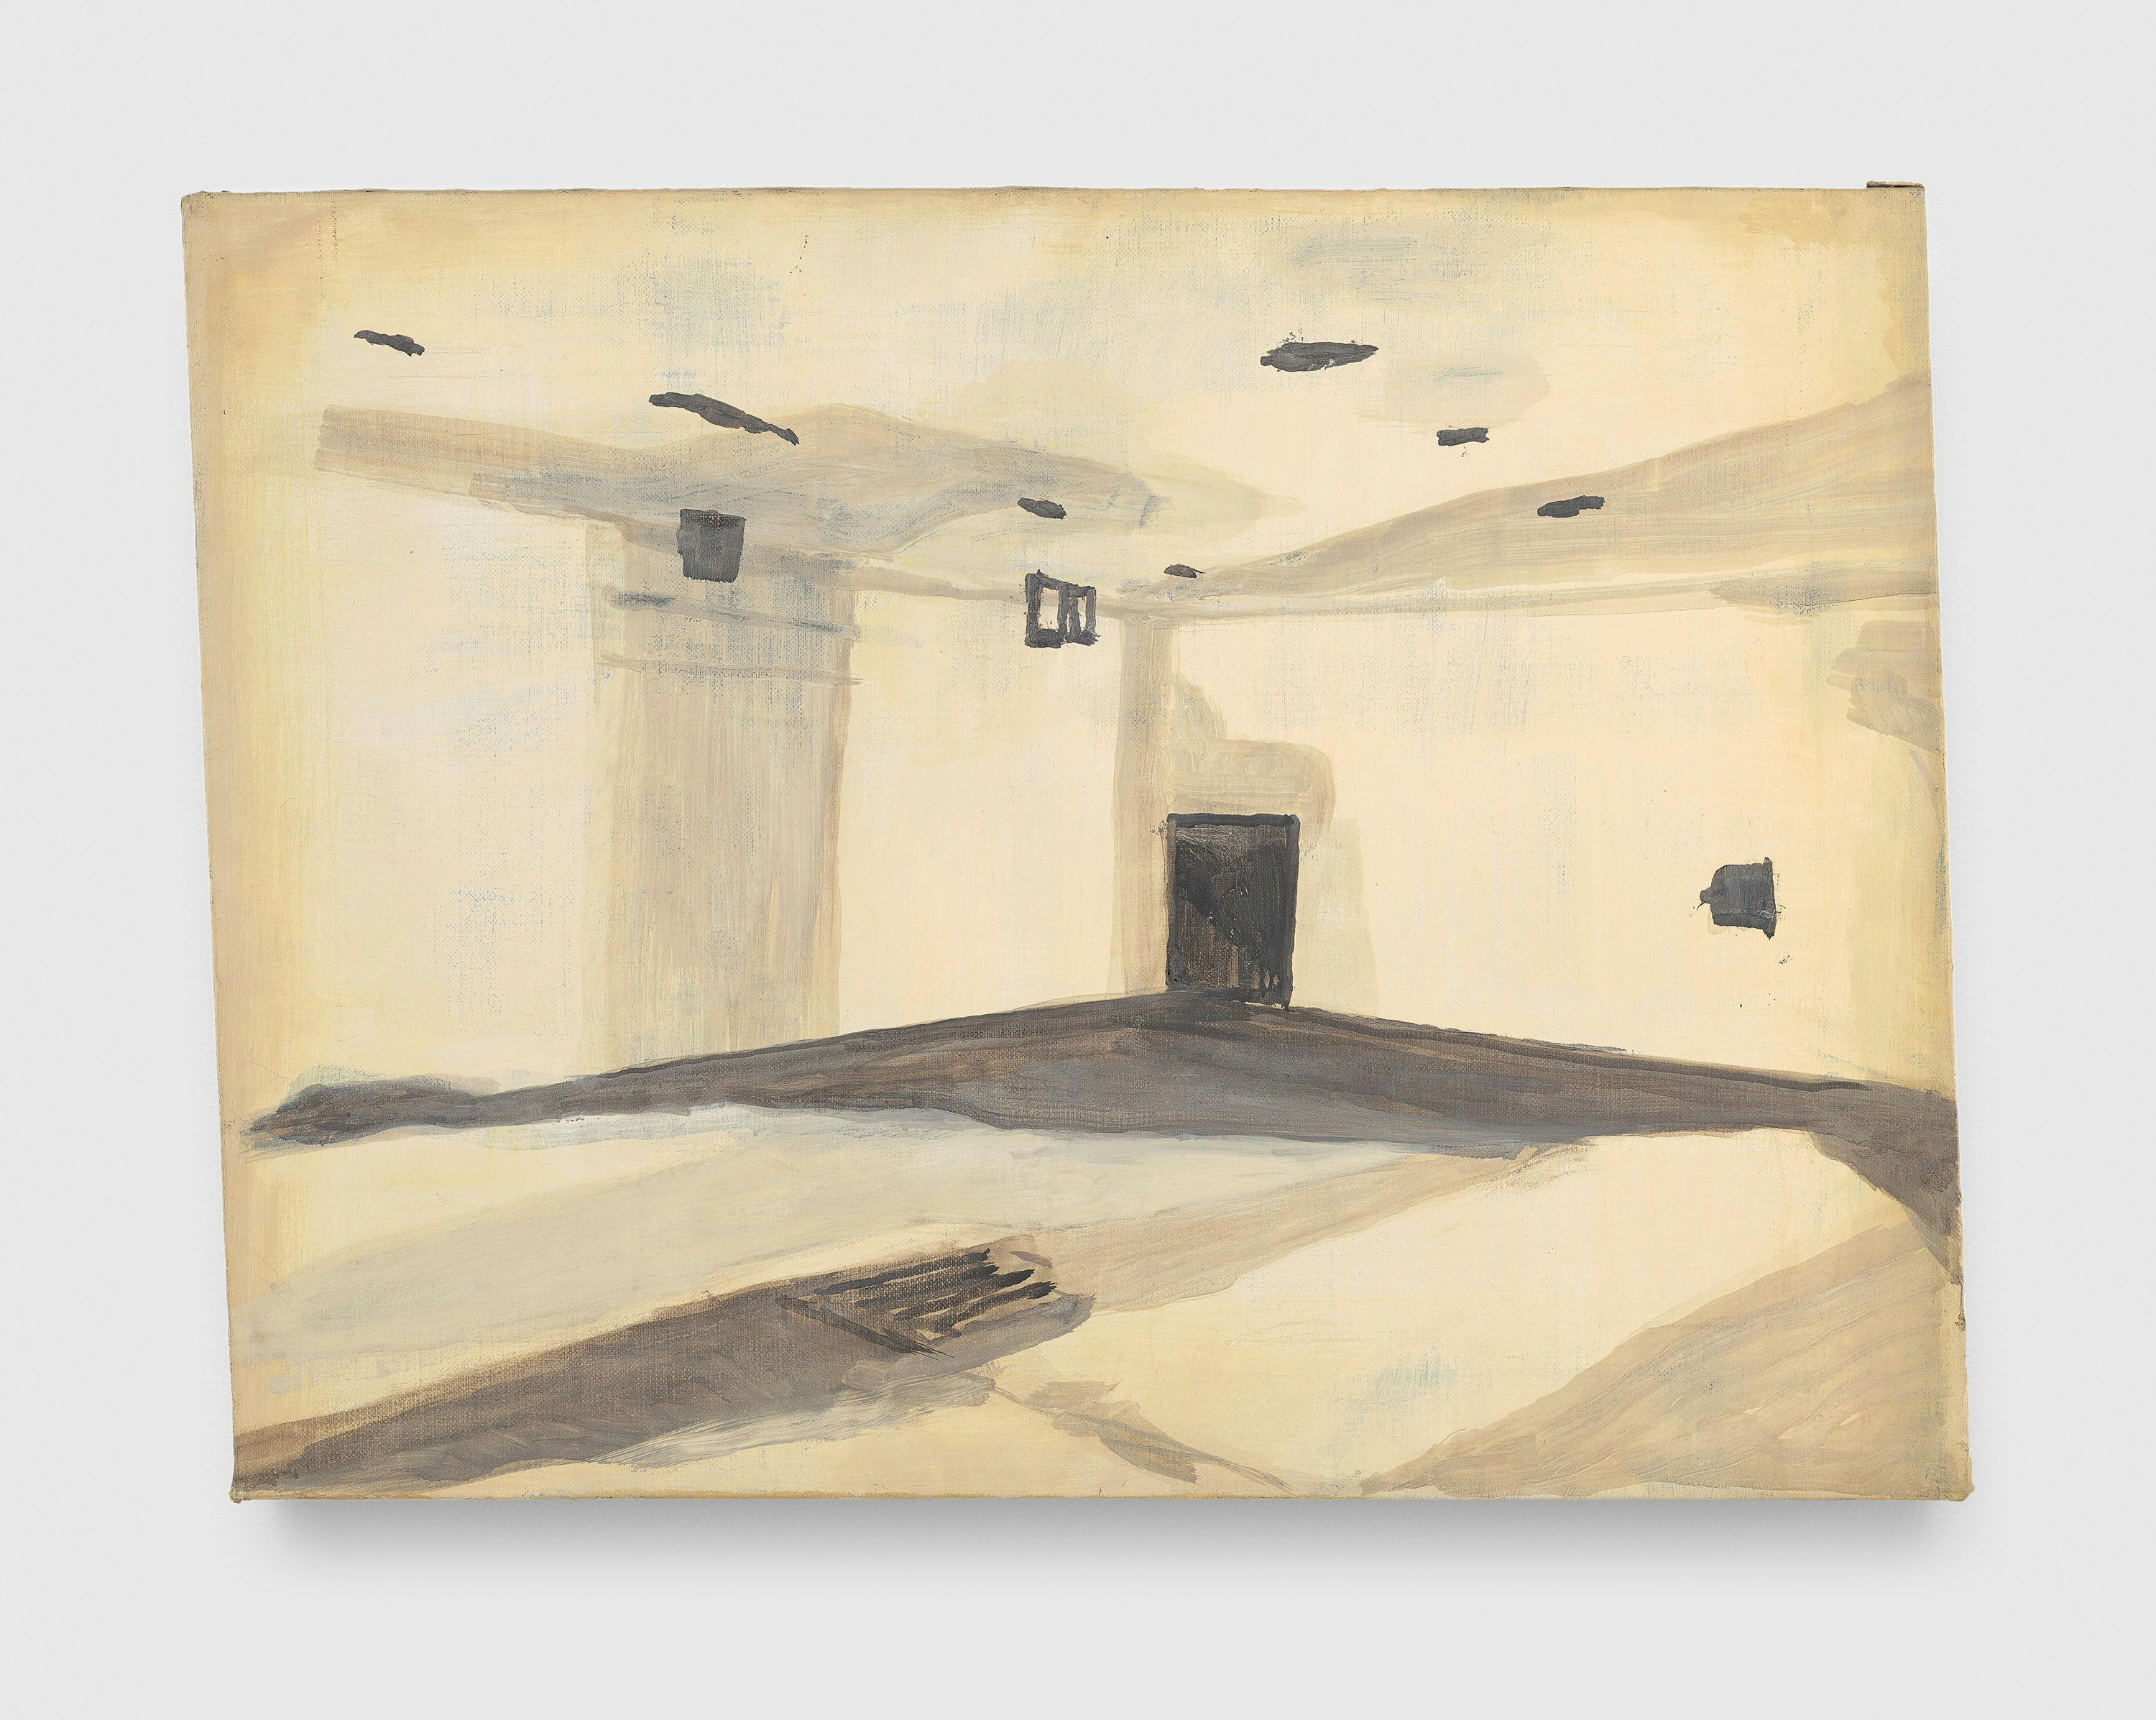 A painting by Luc Tuymans, titled Gaskamer, dated 1986.